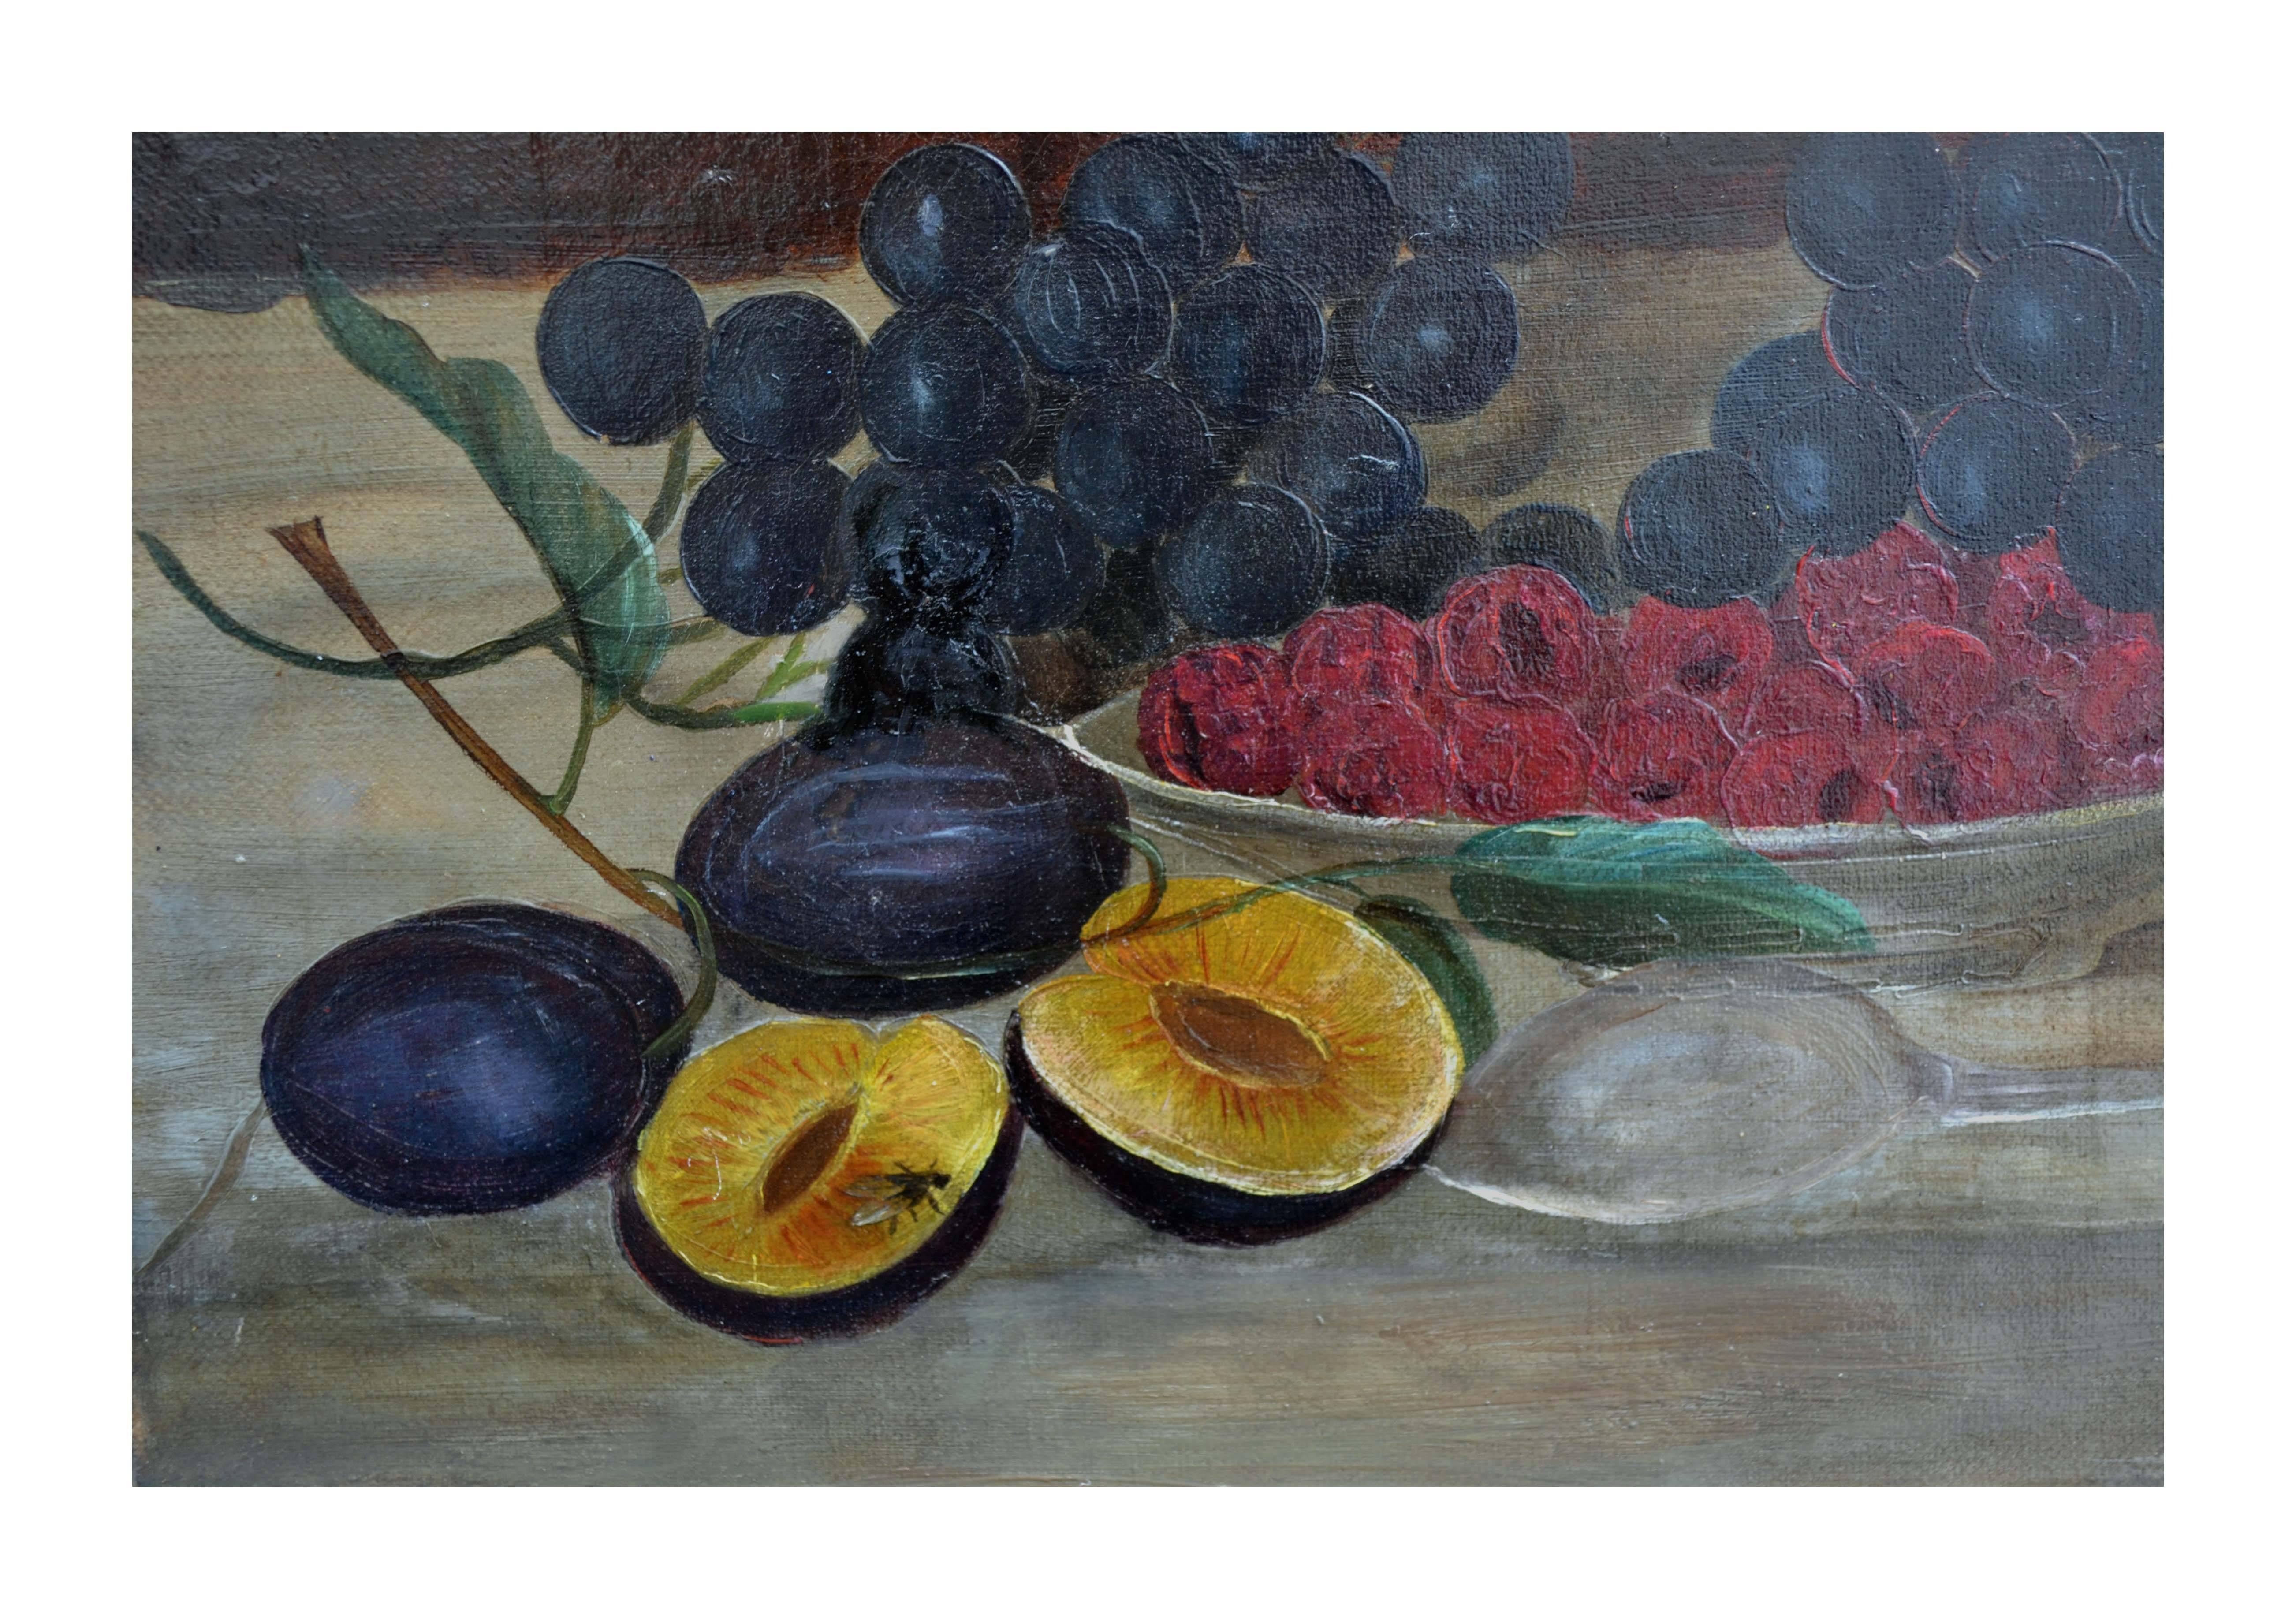 Late-19th-century still life oil painting with fruit in glass compote bowl, flowers in a glass compote, with berries, grapes, and plums. Excellent detail with transparency to the glass compote. Conservation on this painting included tear repairs and